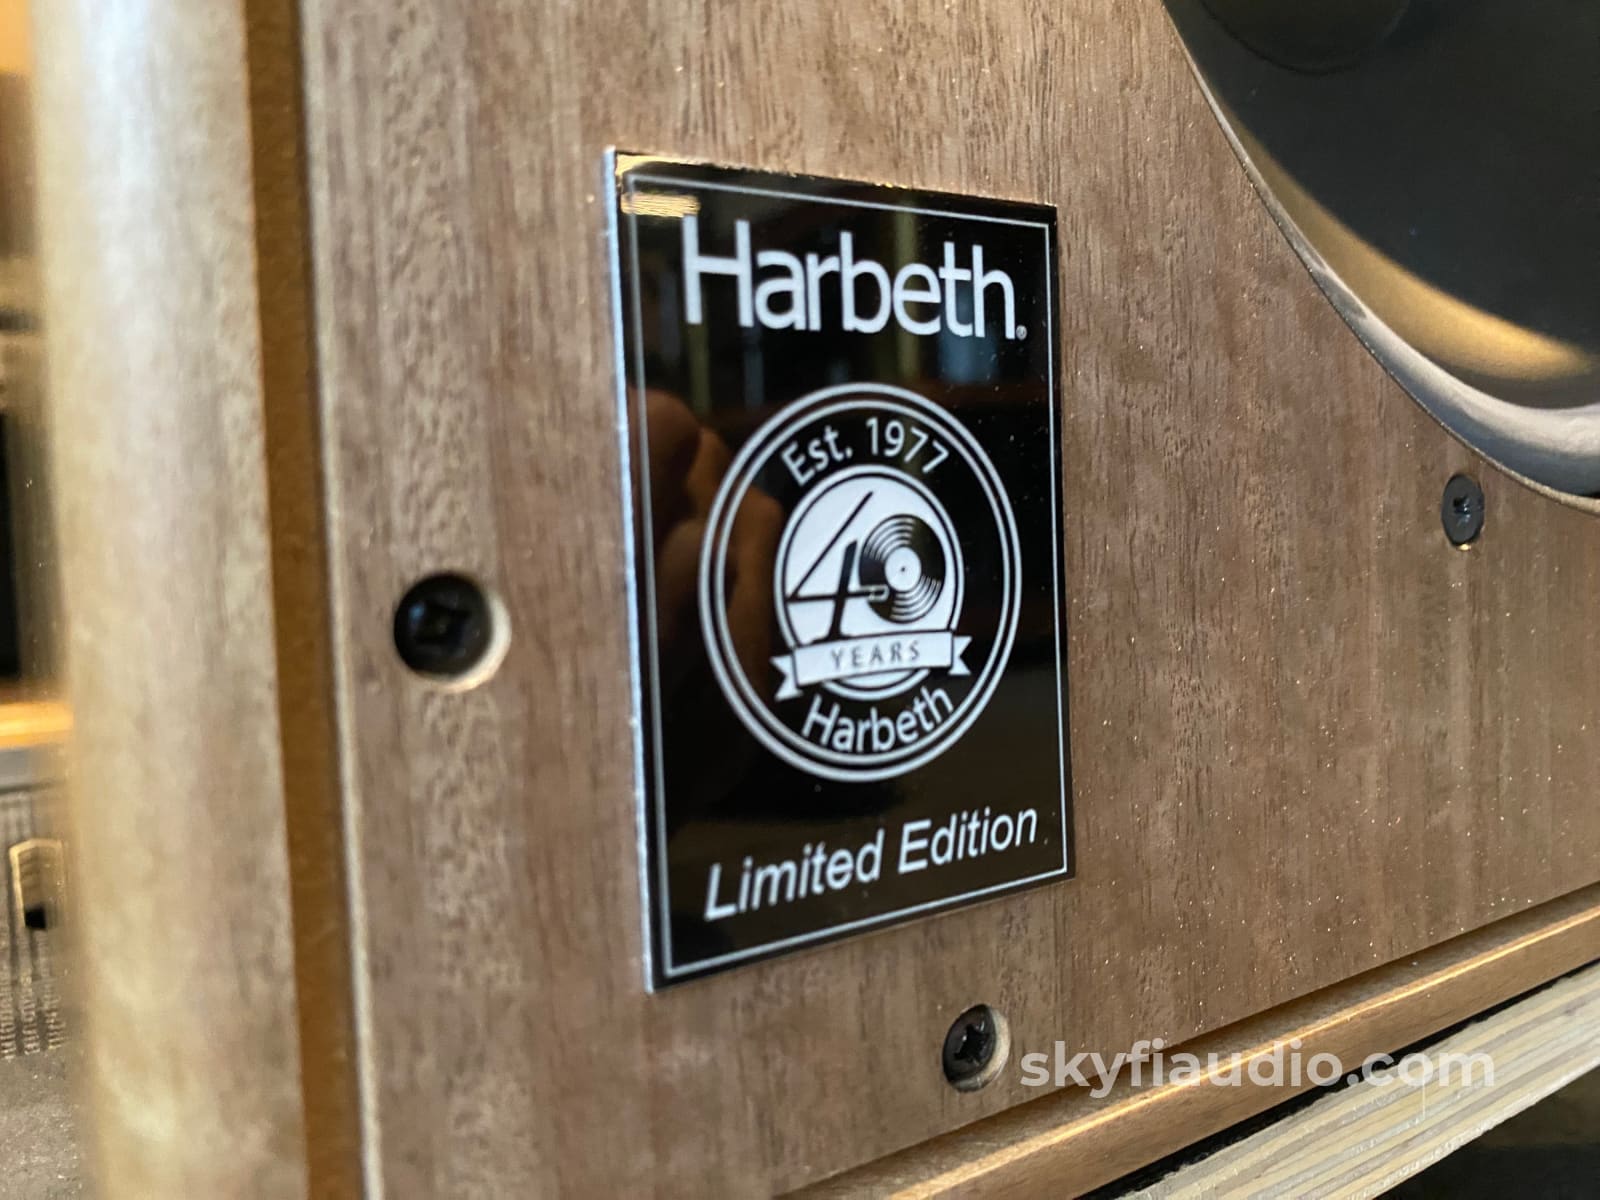 Harbeth 40.2 - 40Th Anniversary Edition Speakers Mint & Complete